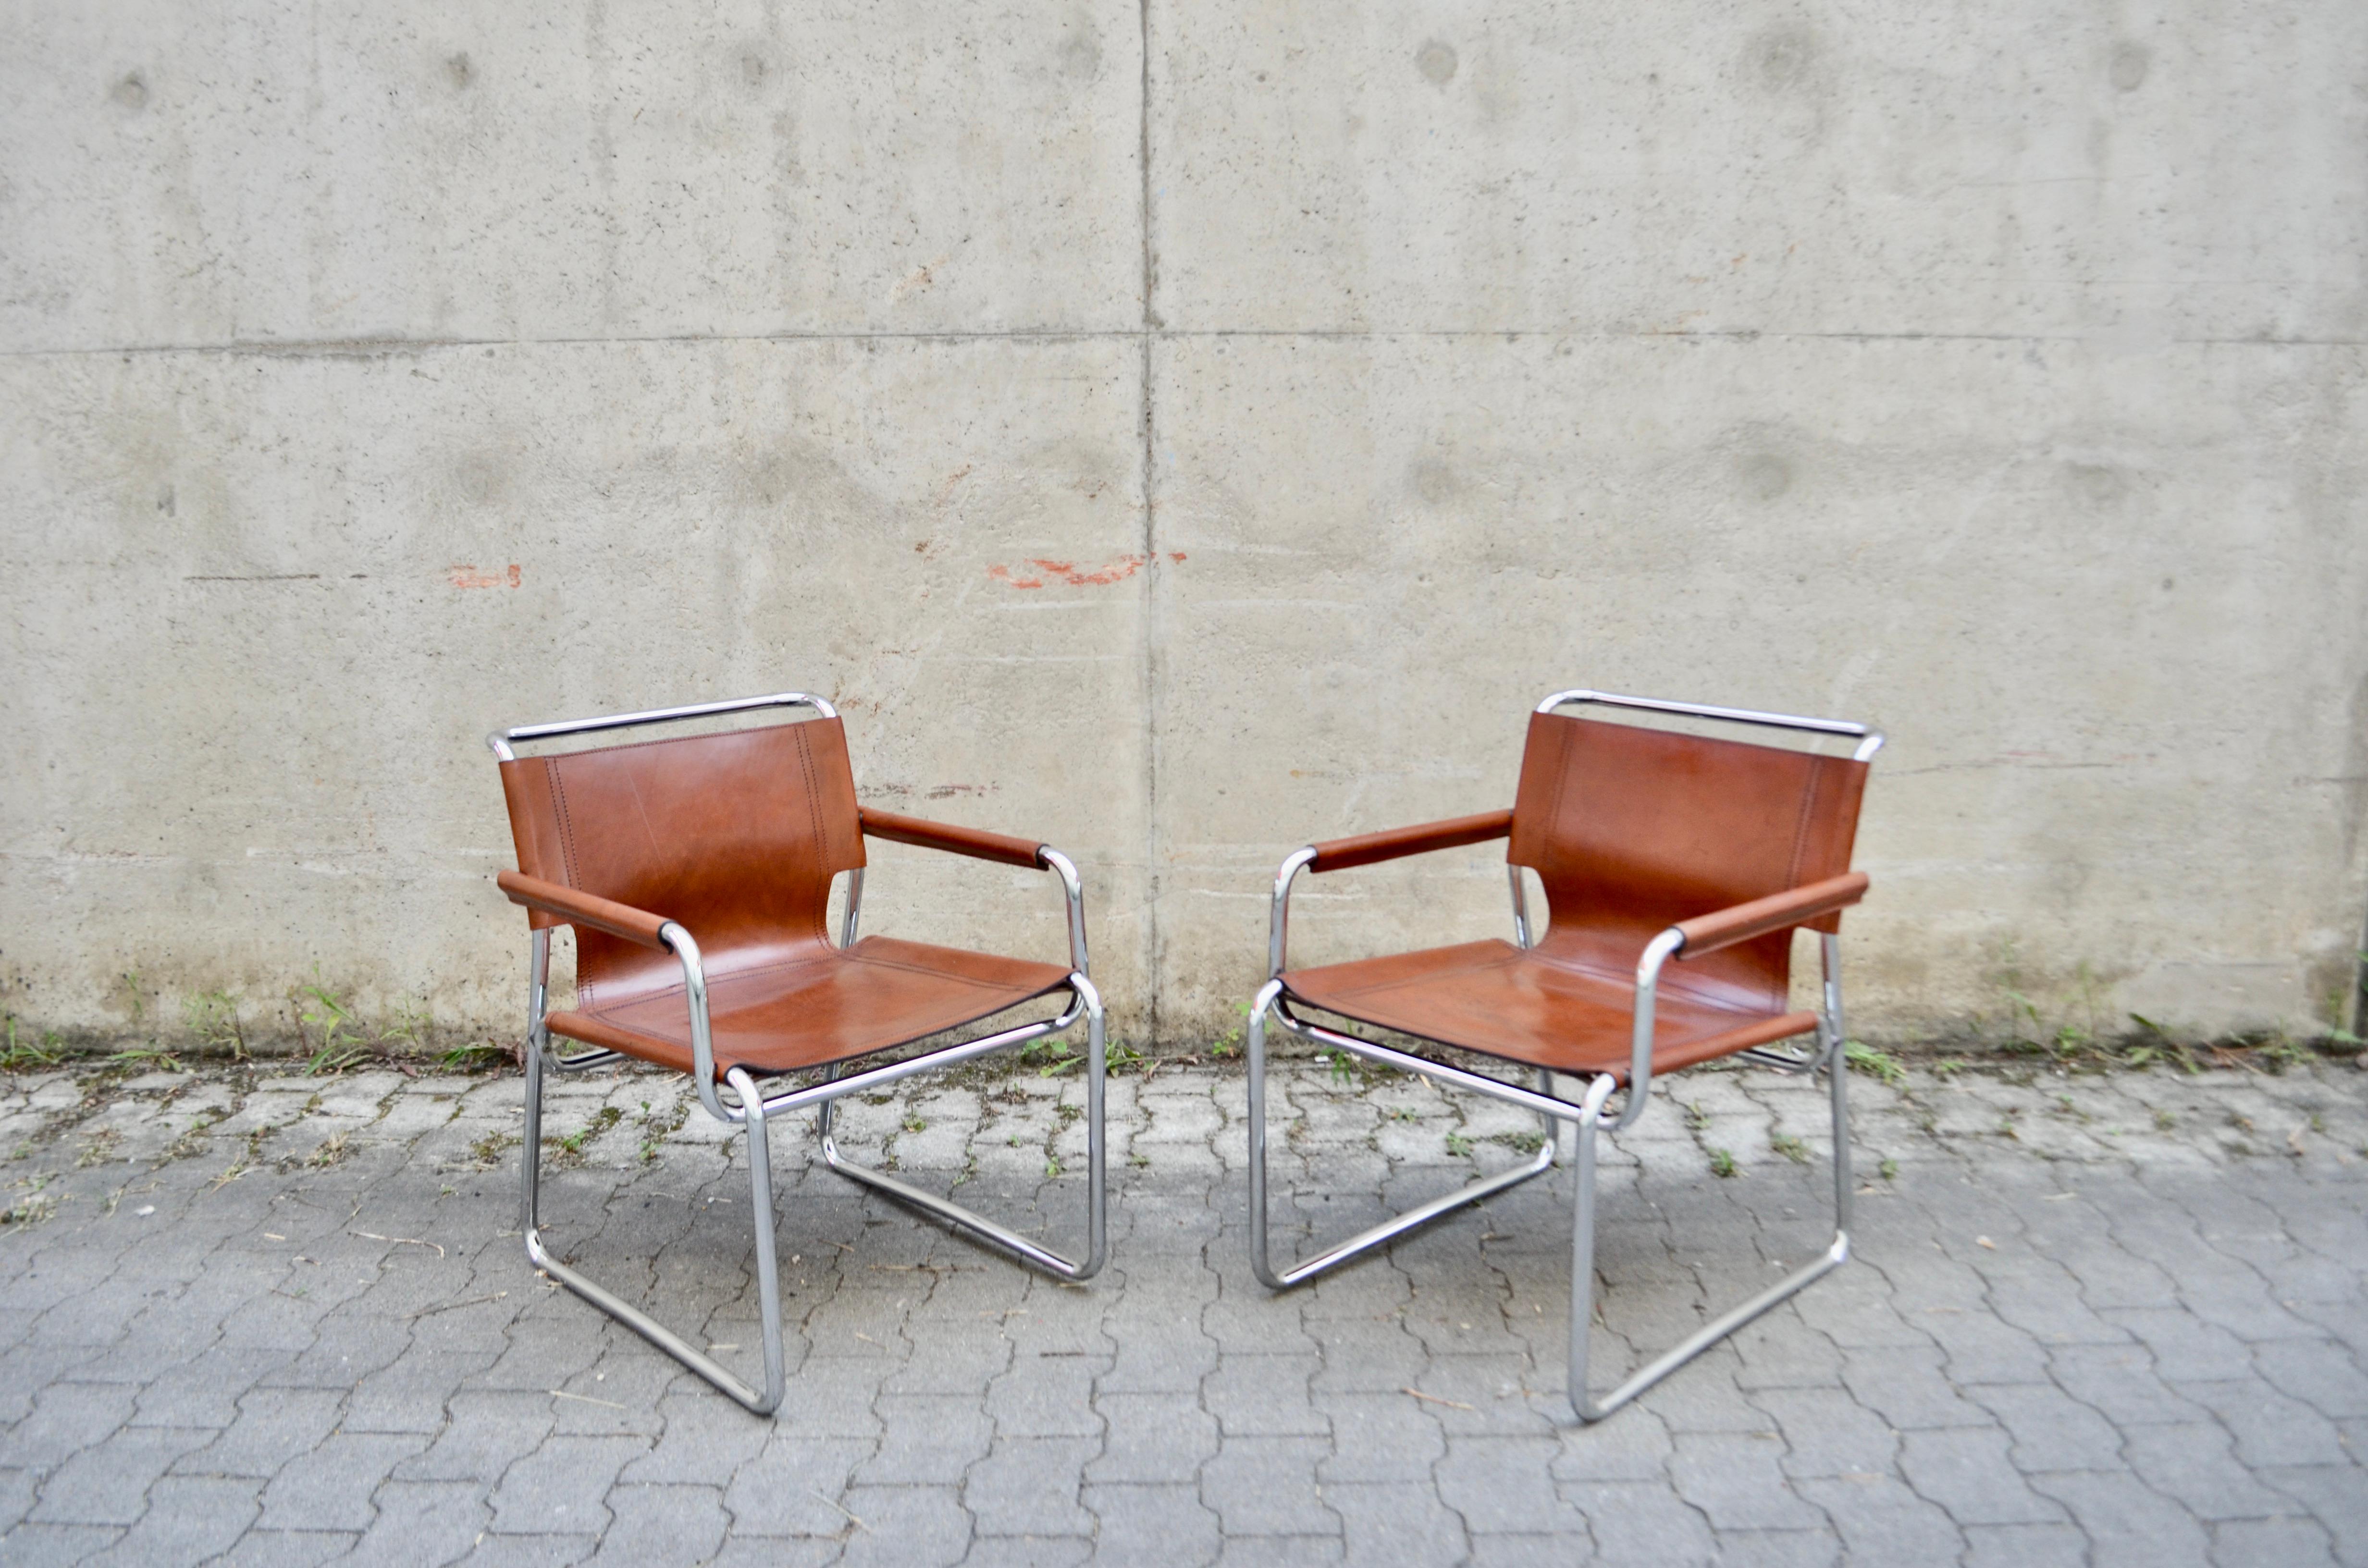 These vintage lounge chair are rare Italian classics.
In the manner of Marcel Breuer this chairs are strongly inspired by the Bauhaus Movement.
It is the thick saddle leather that has developed with the years a gorgeous well aged patina.
The